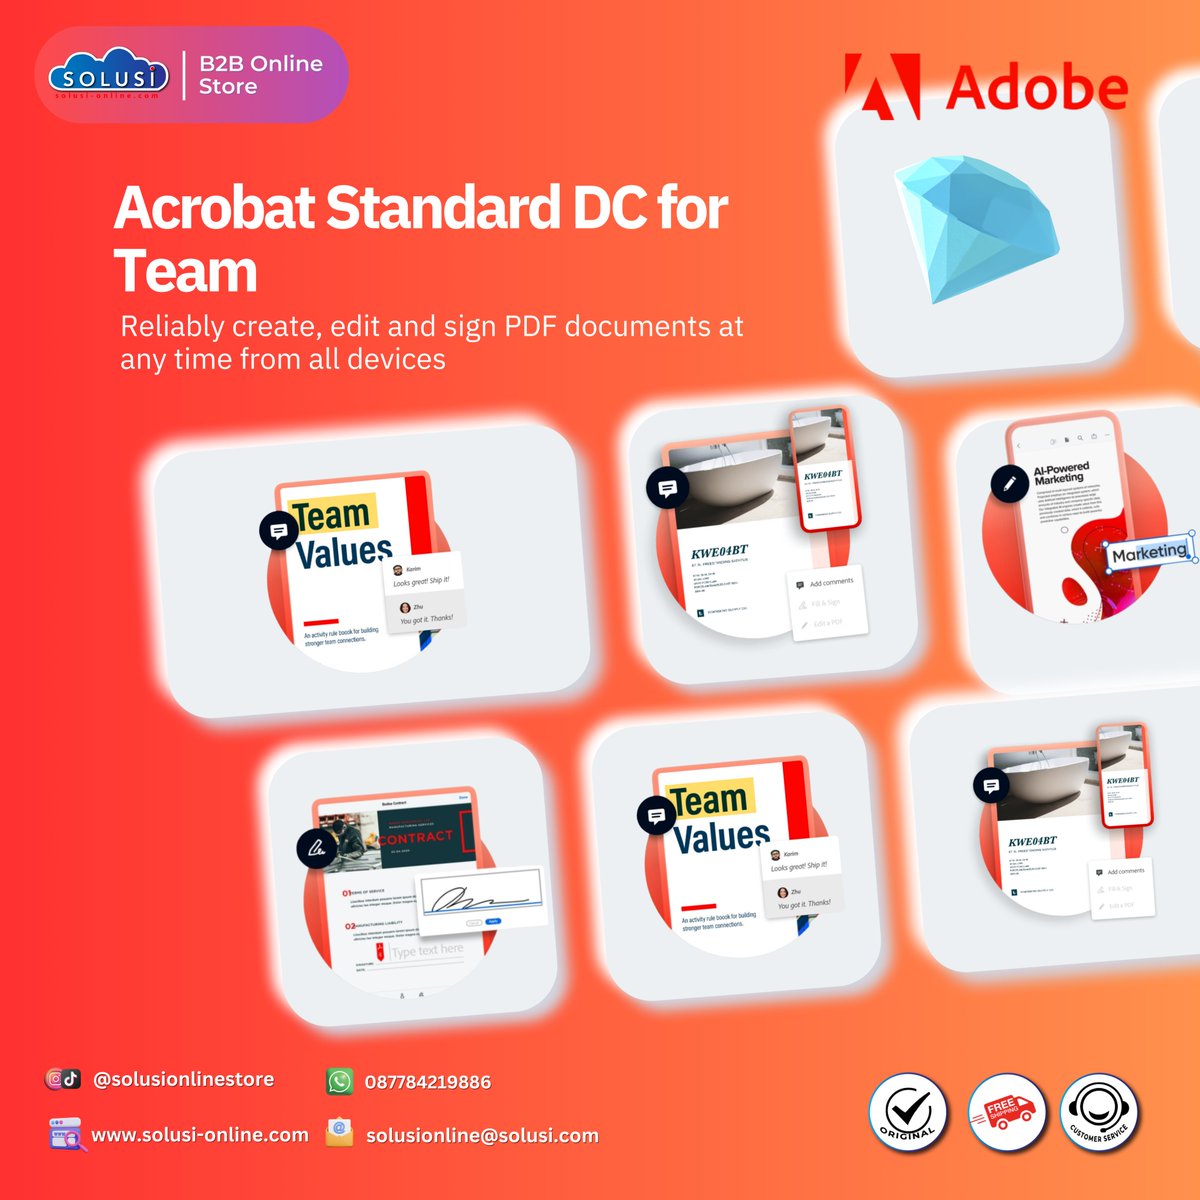 Level up your team's document game with Acrobat Standard DC! Seamlessly create, edit, and sign PDFs across all devices. 💼✍️

Shop Now: solusi-online.com/product/acroba…

#AcrobatStandard #WorkFlow #PDFMagic #ShopNow #SolusiOnlineStore #B2BOnlineStore